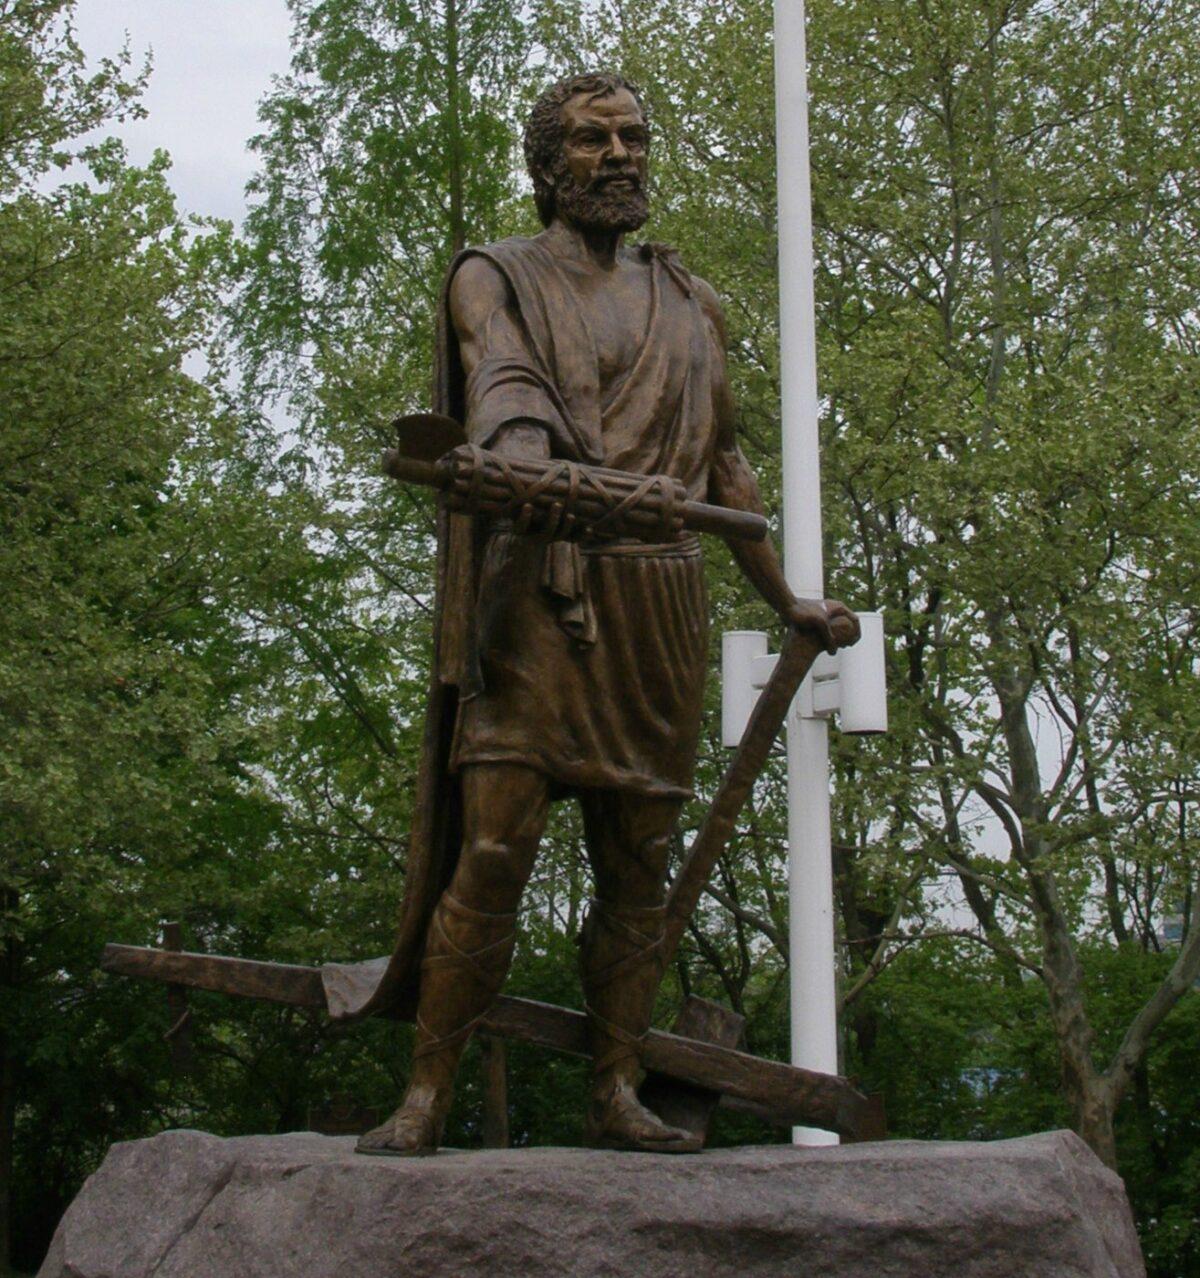 George Washington modeled himself after the great Roman leader Cincinnatus, who left his plough in the field to fight for Rome and then returned to the field shortly after victory. The statue of Cincinnatus at his plough, in Cincinnati. (Public Domain)